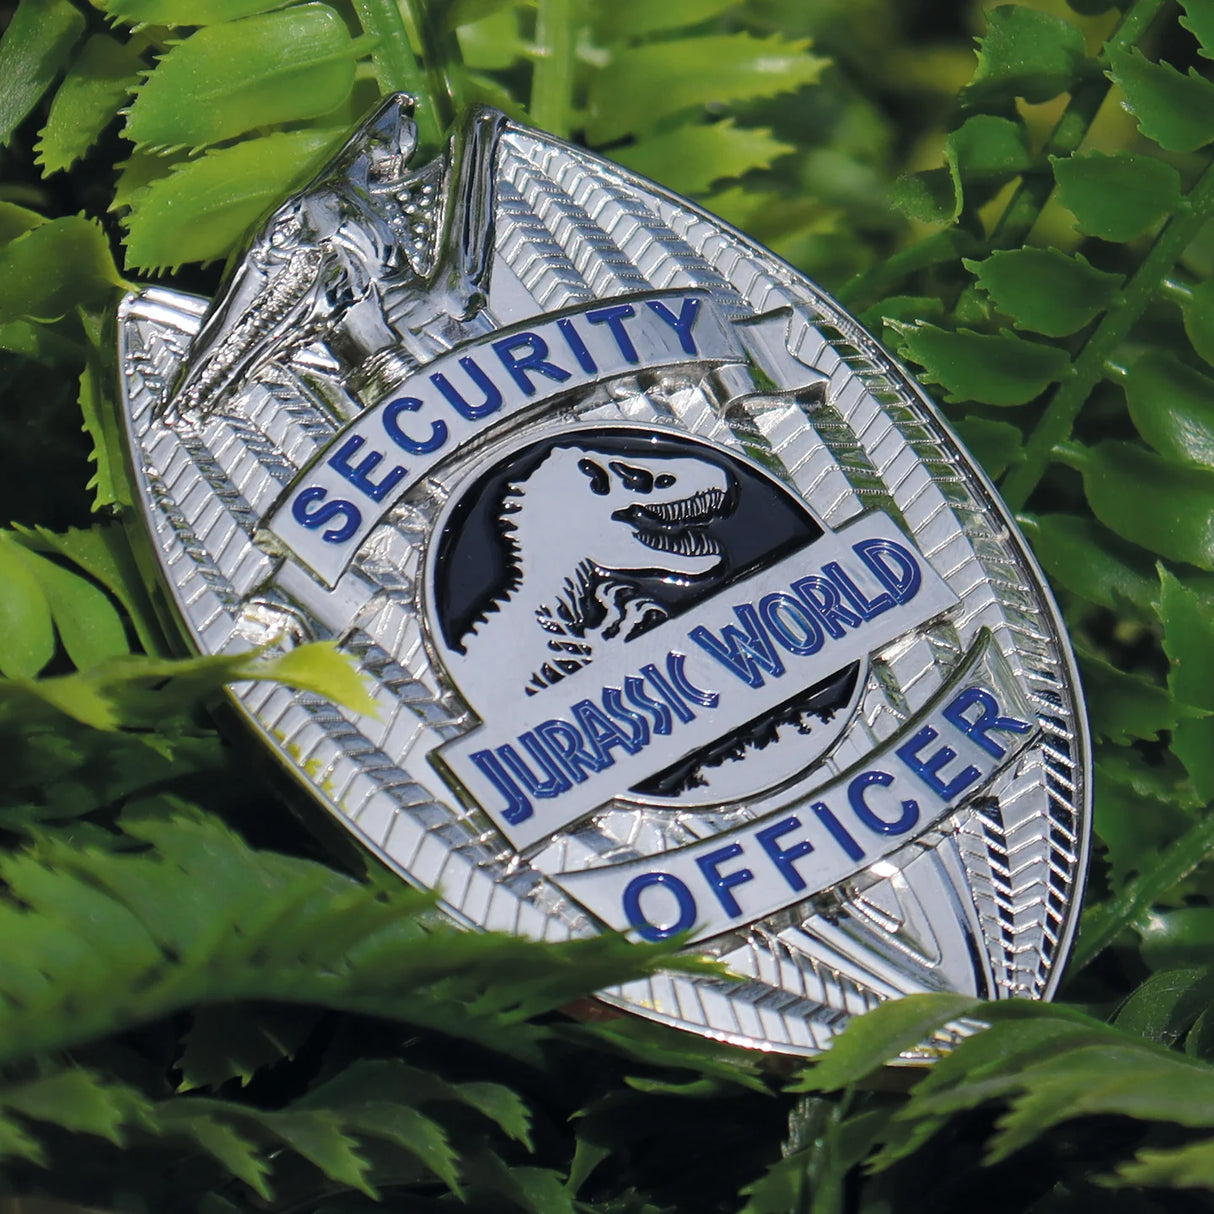 Jurassic World | Replica Security Badge | Limited Edition